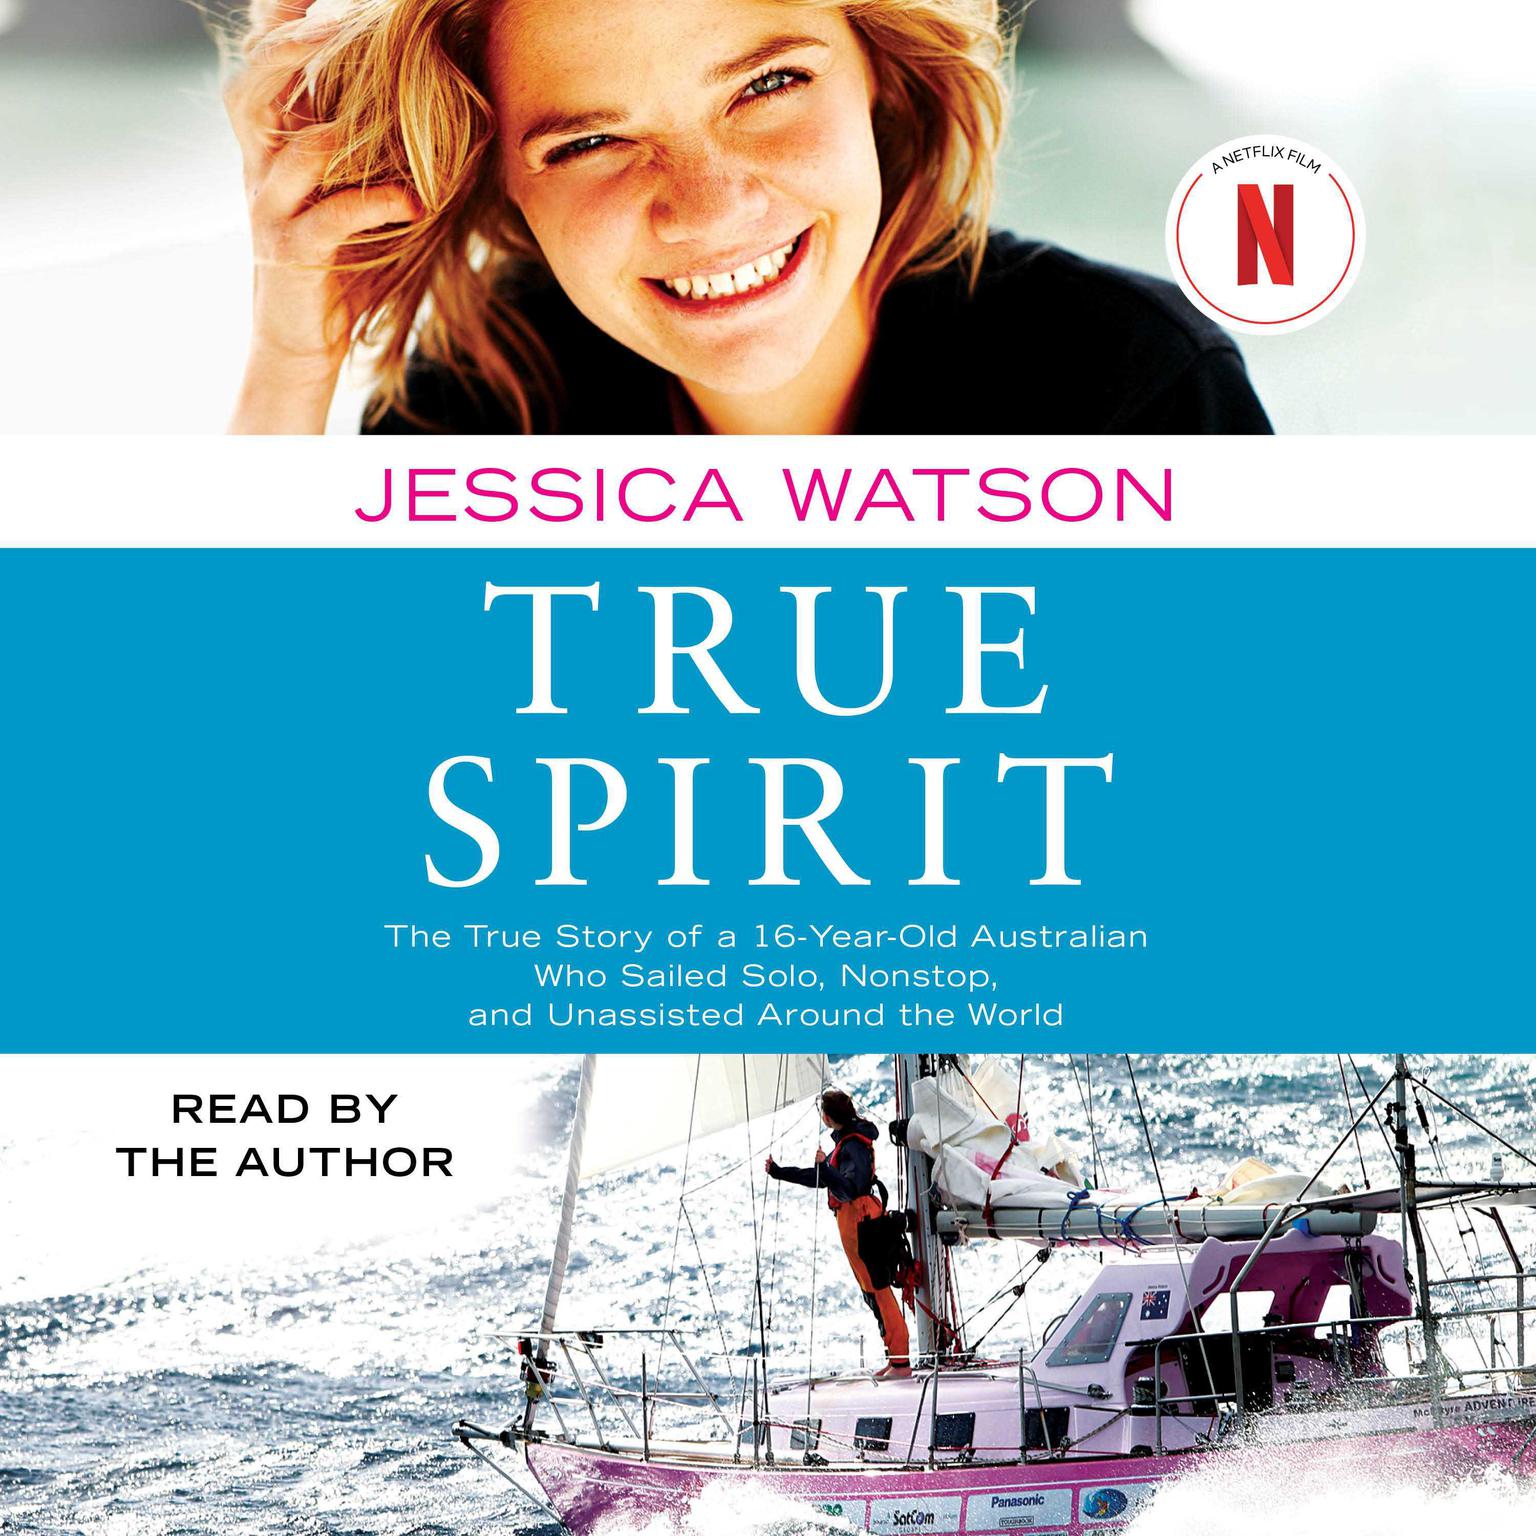 True Spirit: The True Story of a 16-Year-Old Australian Who Sailed Solo, Nonstop, and Unassisted Around the World Audiobook, by Jessica Watson